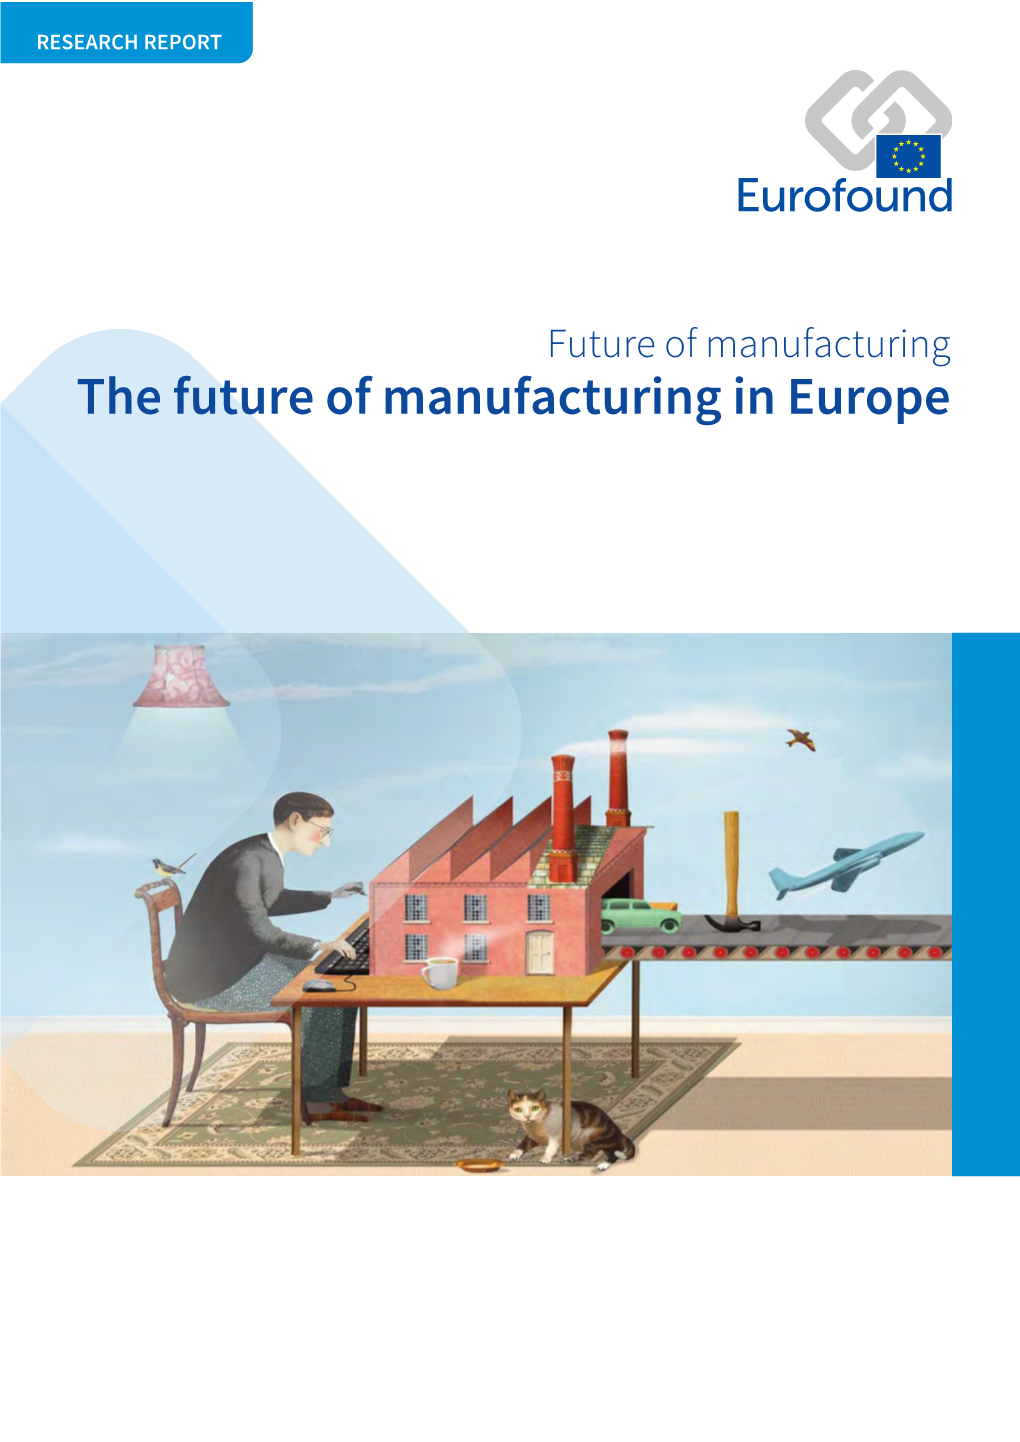 The Future of Manufacturing in Europe